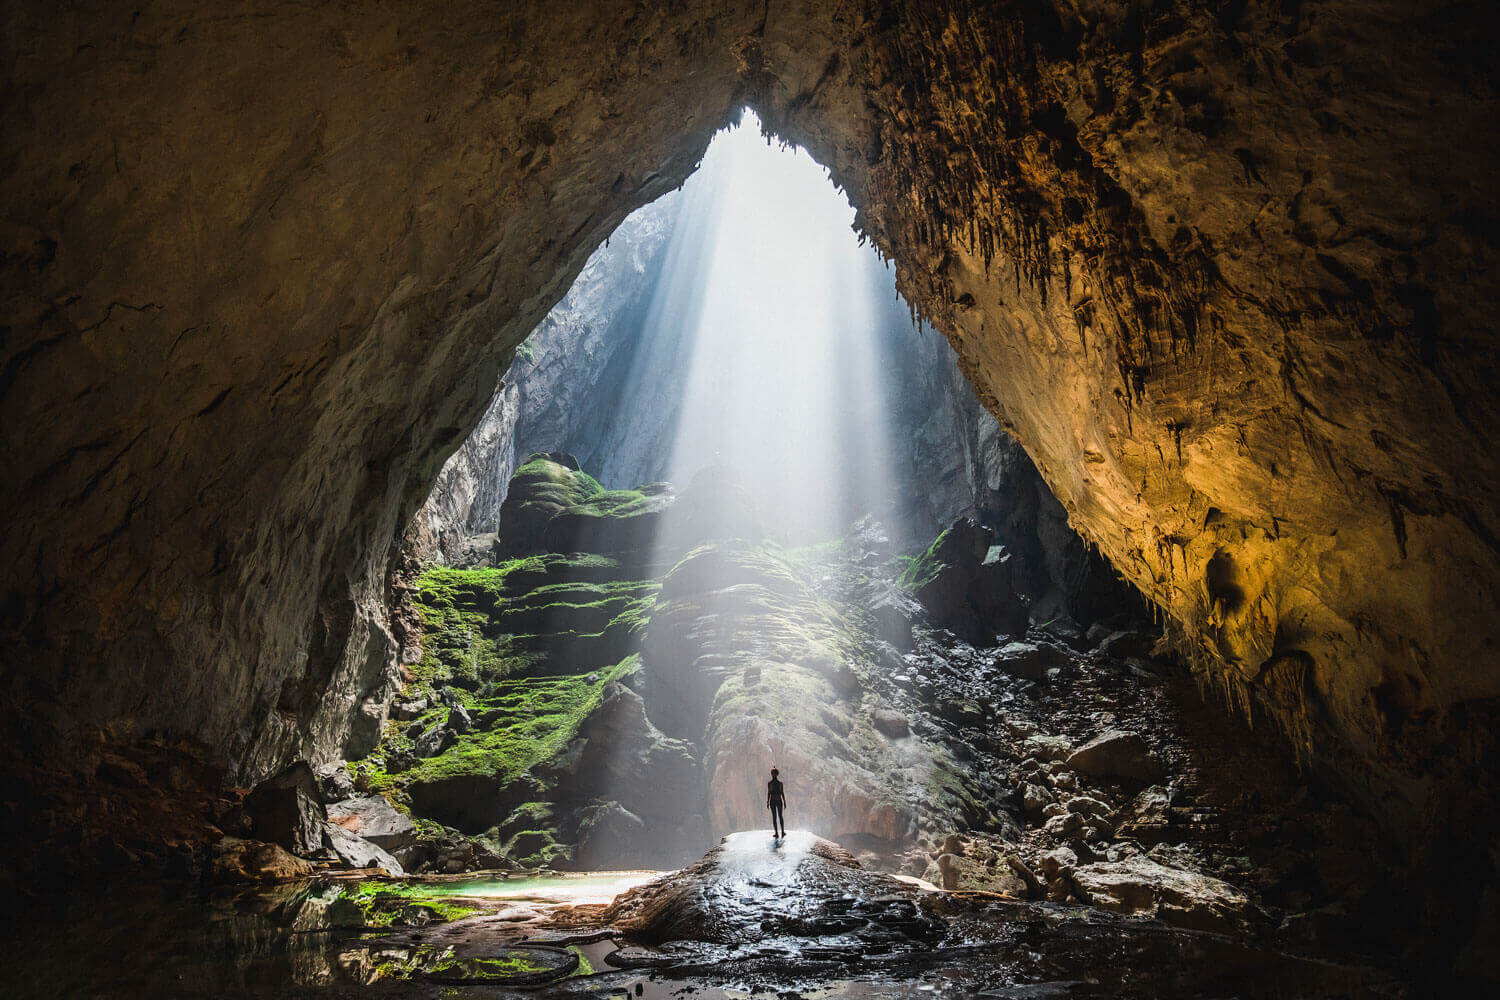 Admire the magical moment when sunlight shines into Son Doong Cave through Doline 1.